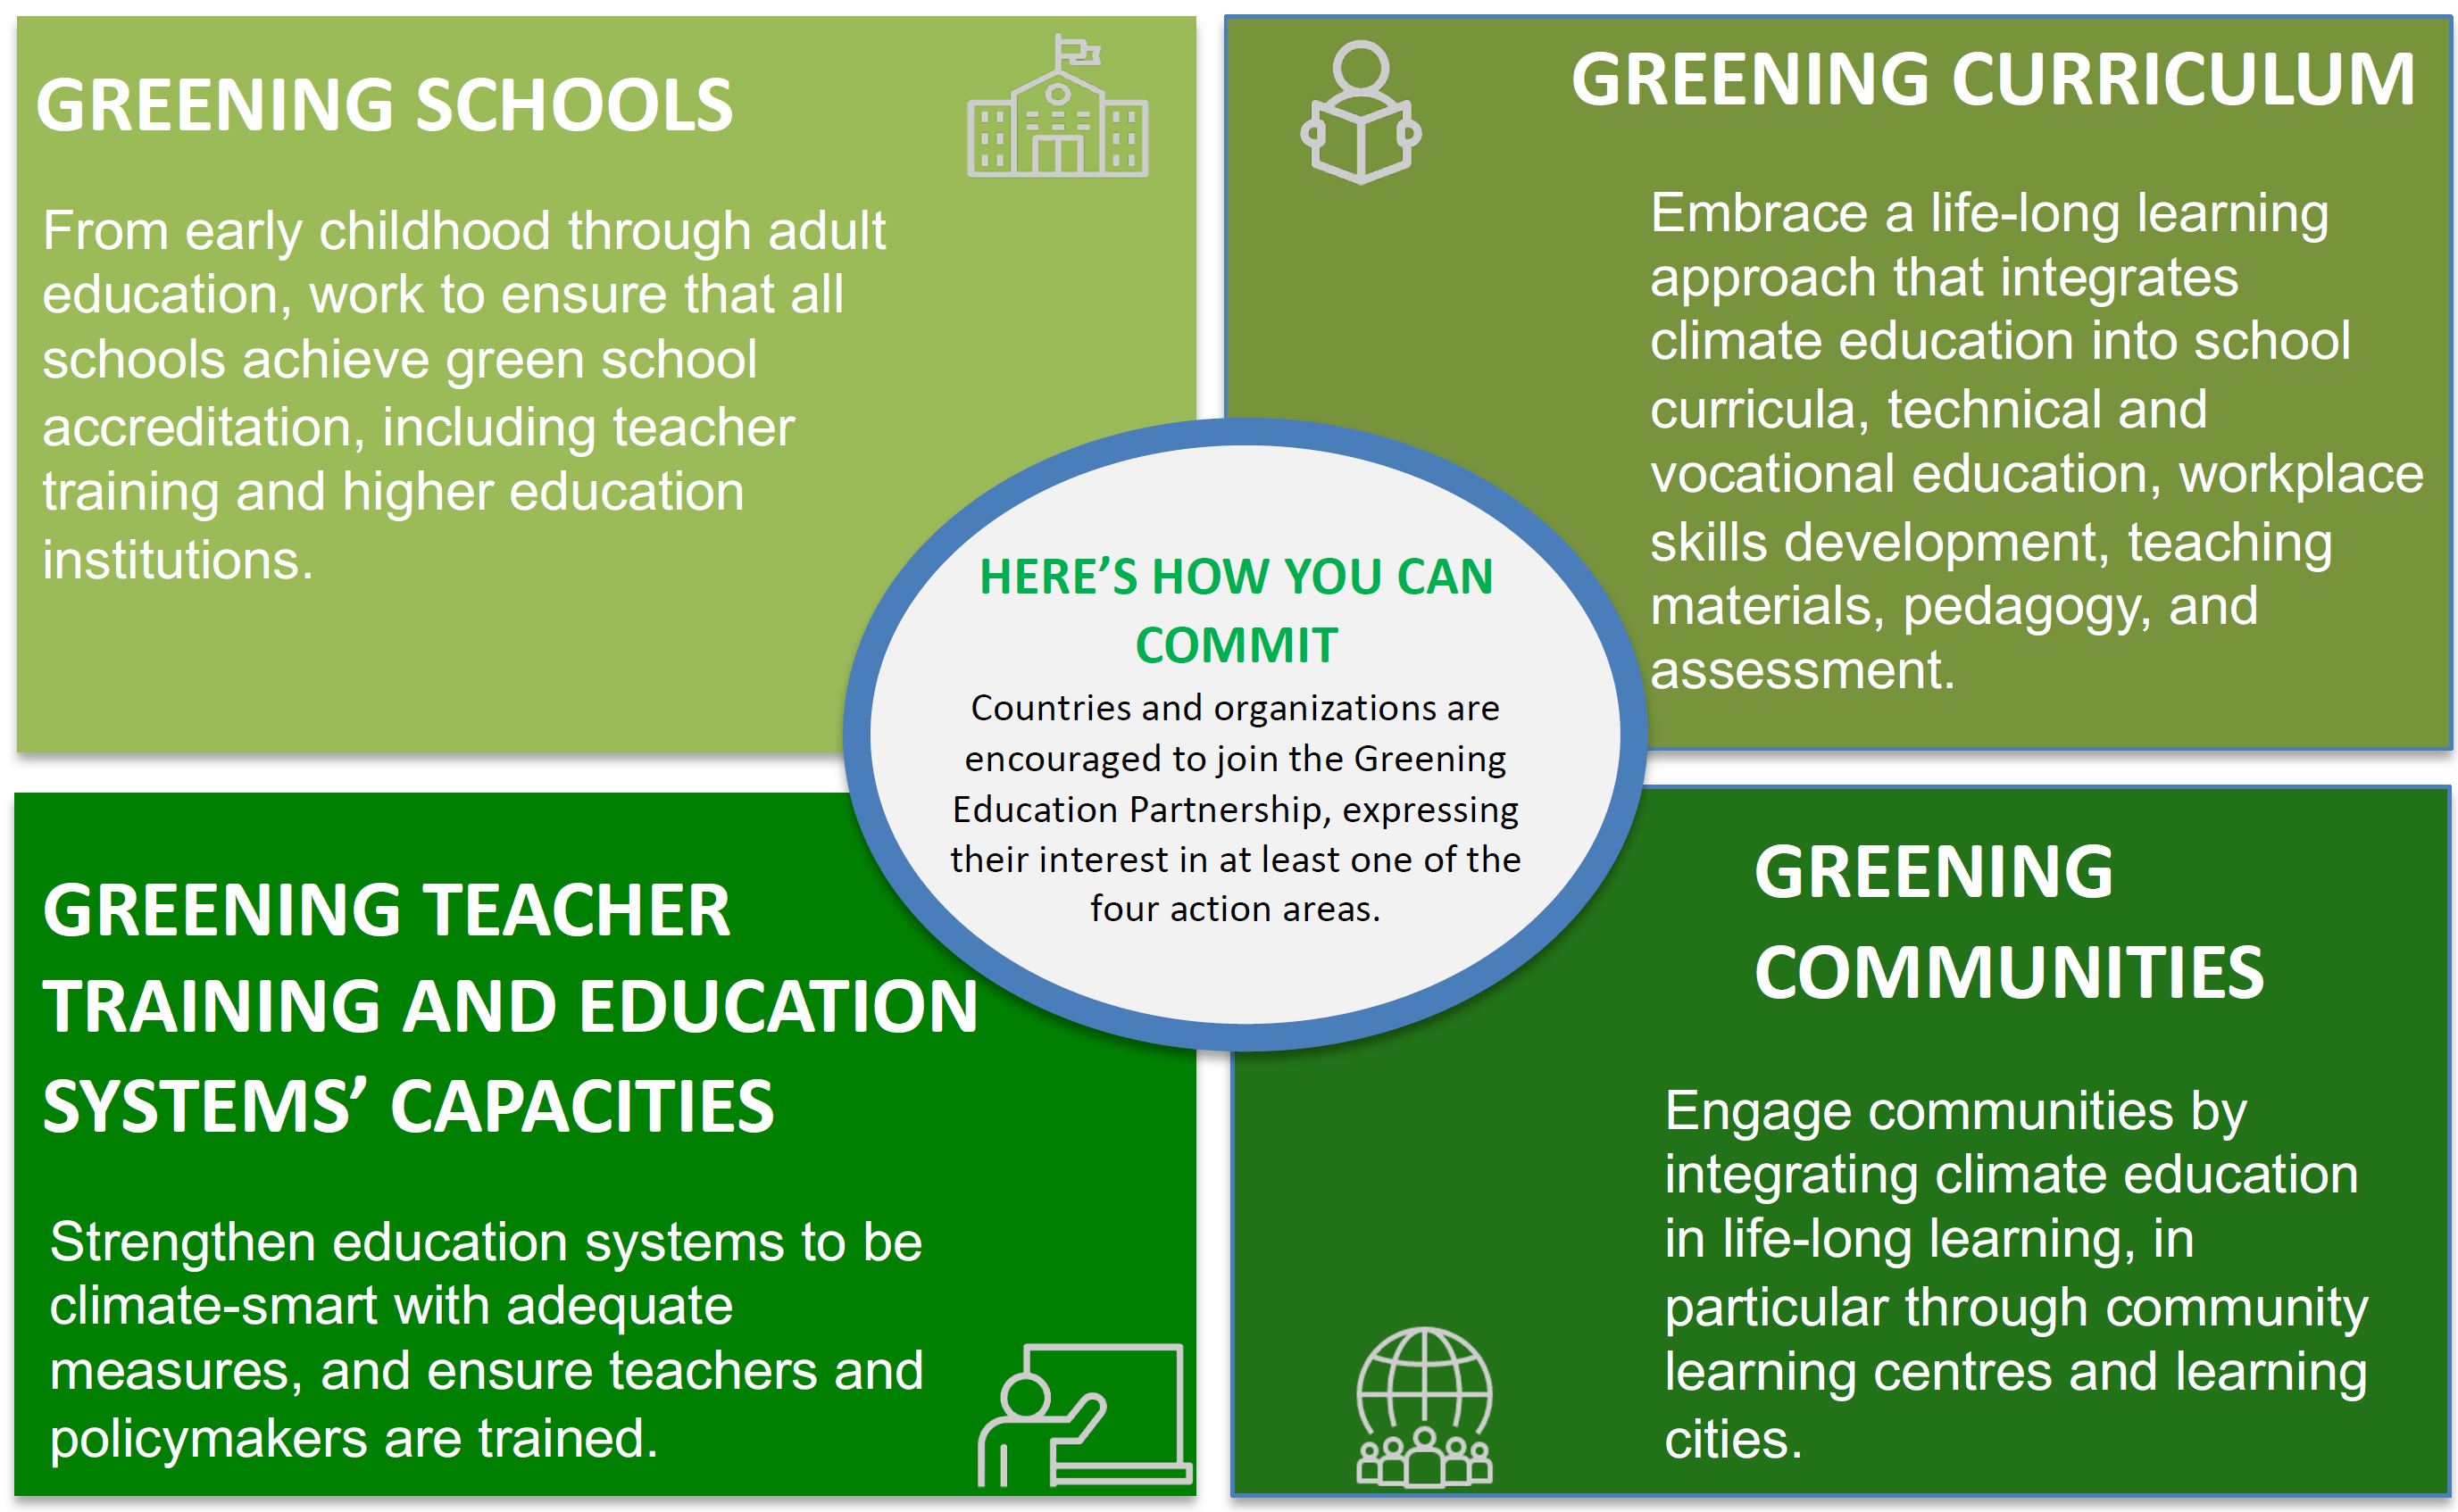 Green infographic divided into four quadrants. From top left going clockwise, "Greening Schools. Greening Curriculum. Greening Communities. Greening Teacher Training and Education Systems' Capacities."